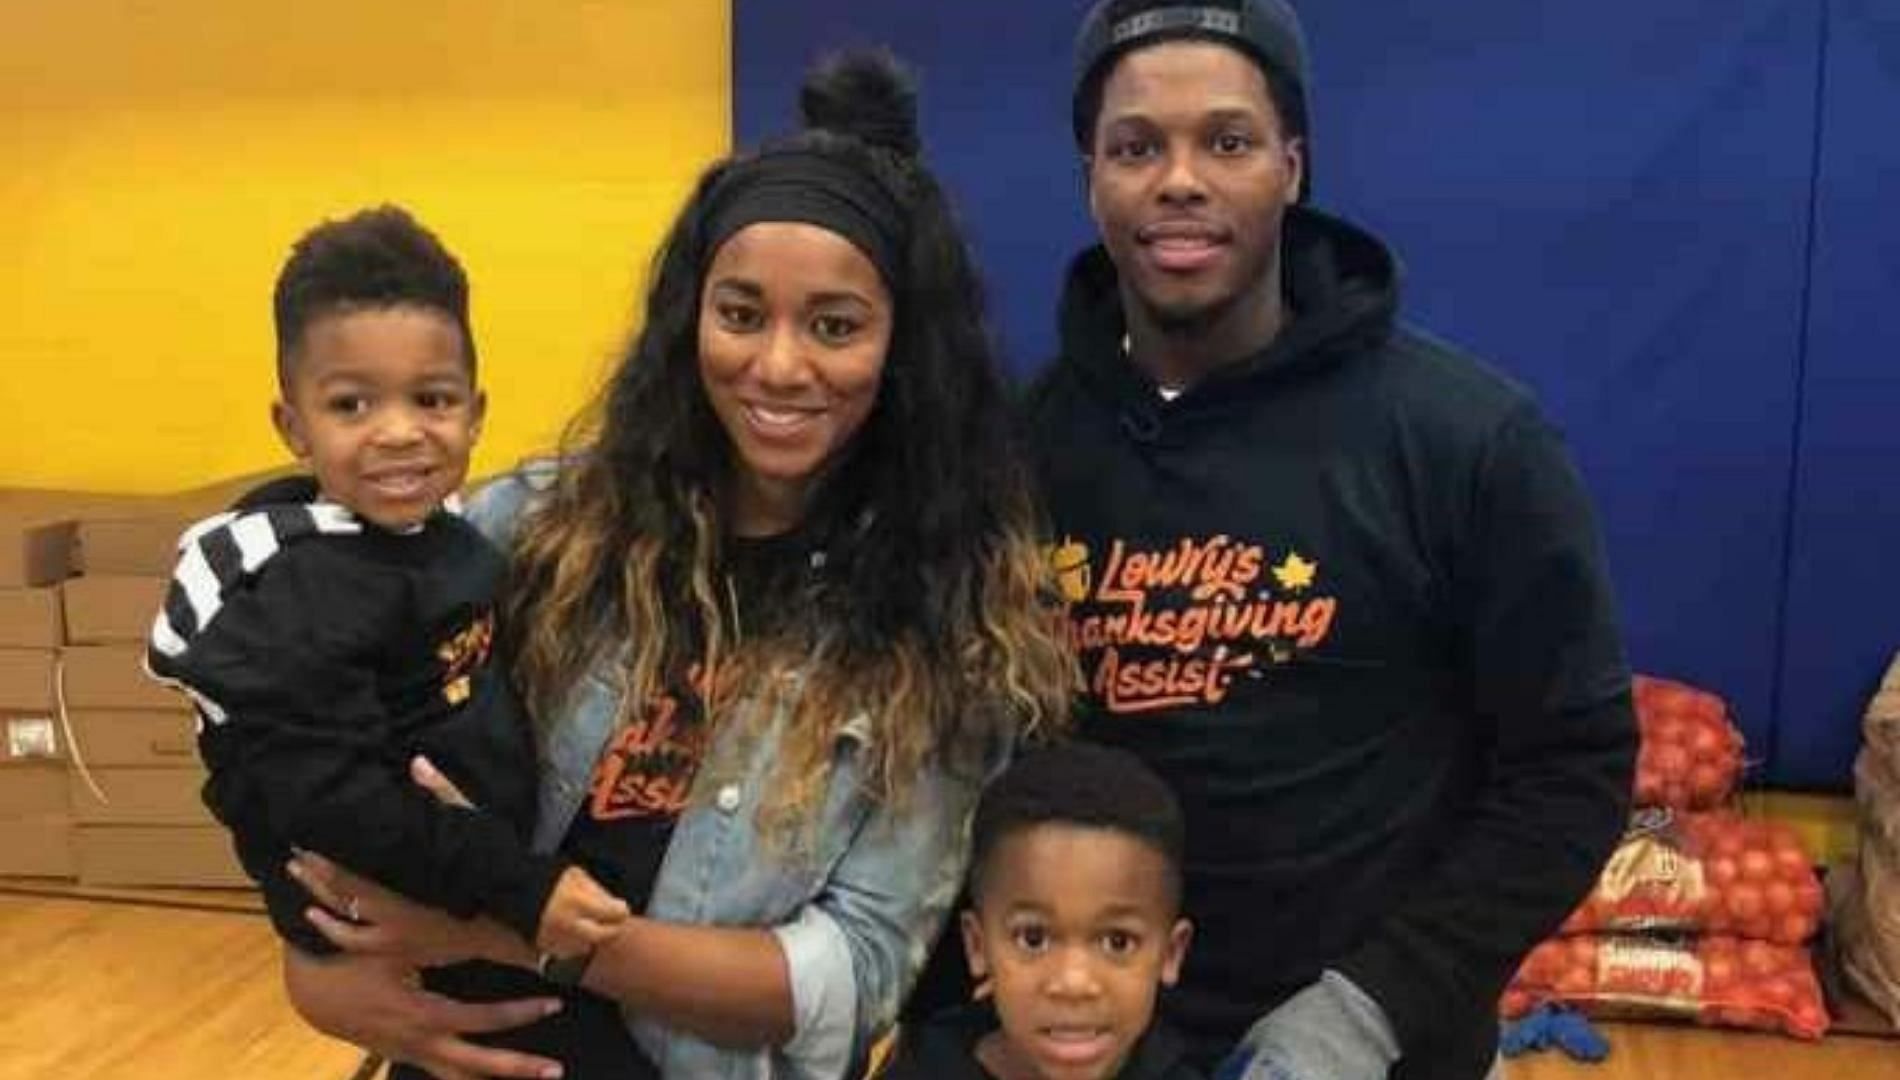 Kyle Lowry and his wife and two kids